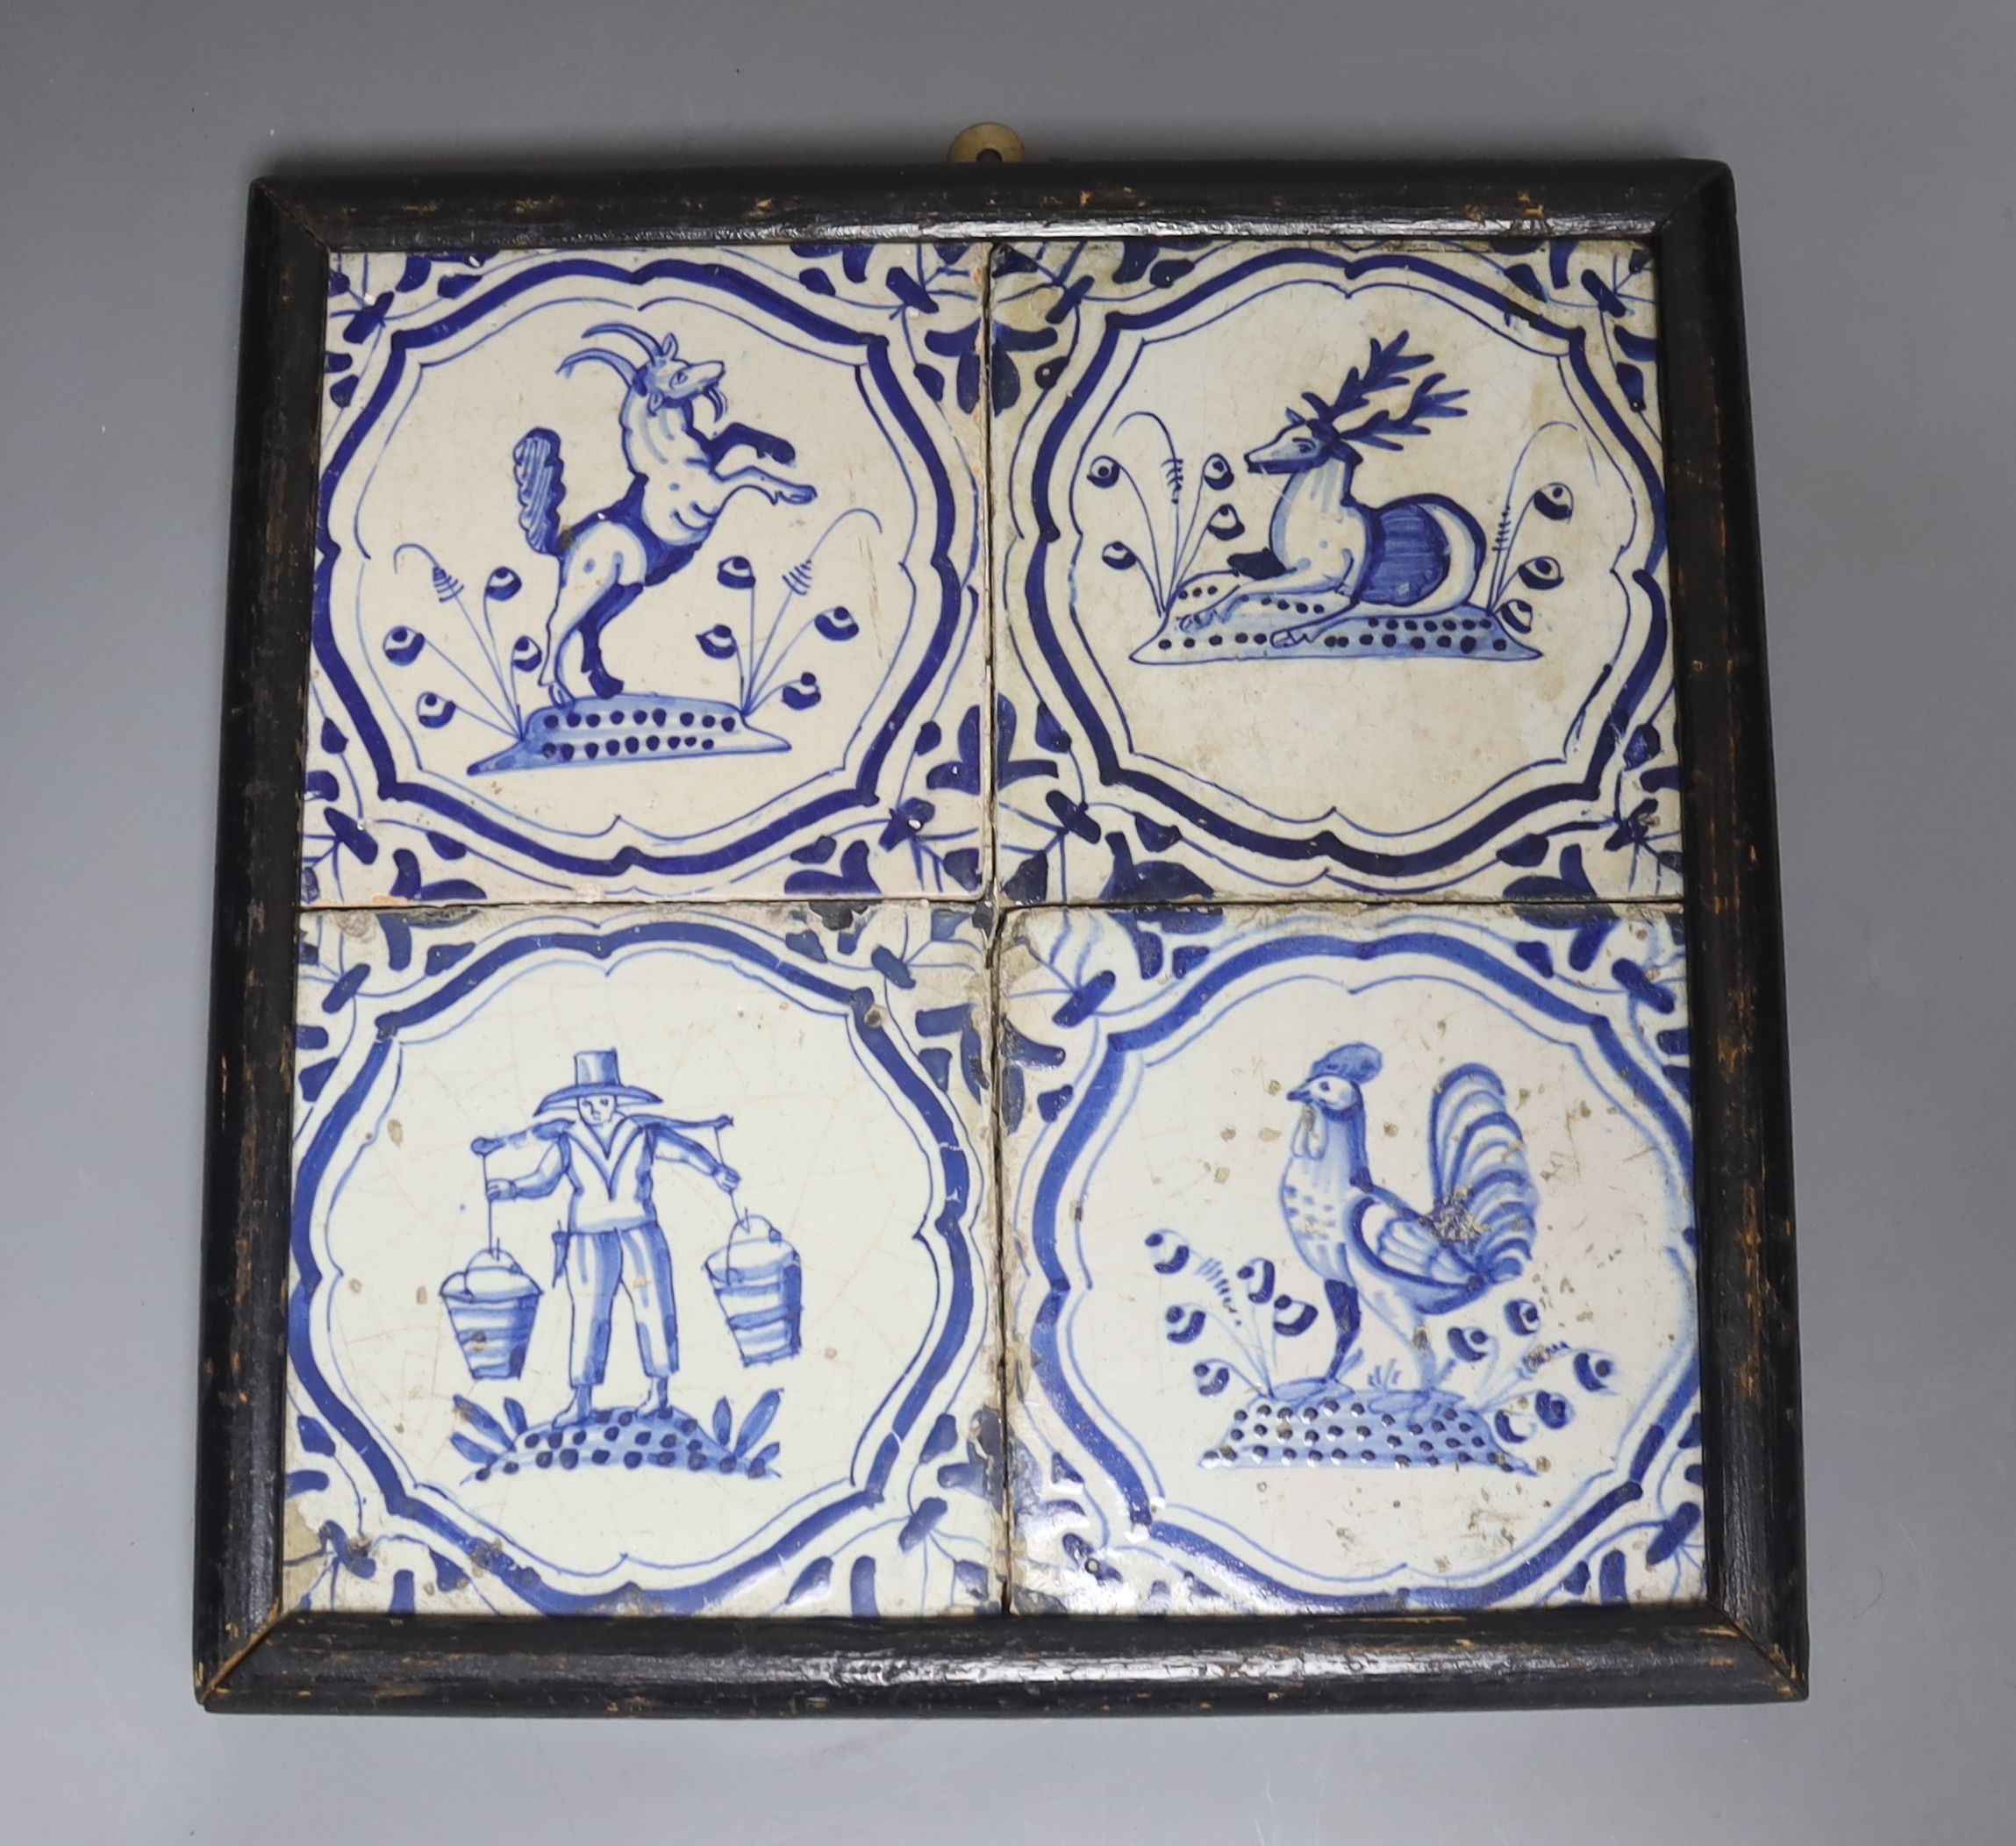 Four 18th century Dutch Delft blue and white tiles, decorated with deer, cockerels and figures within shaped panels (frame 29cm)